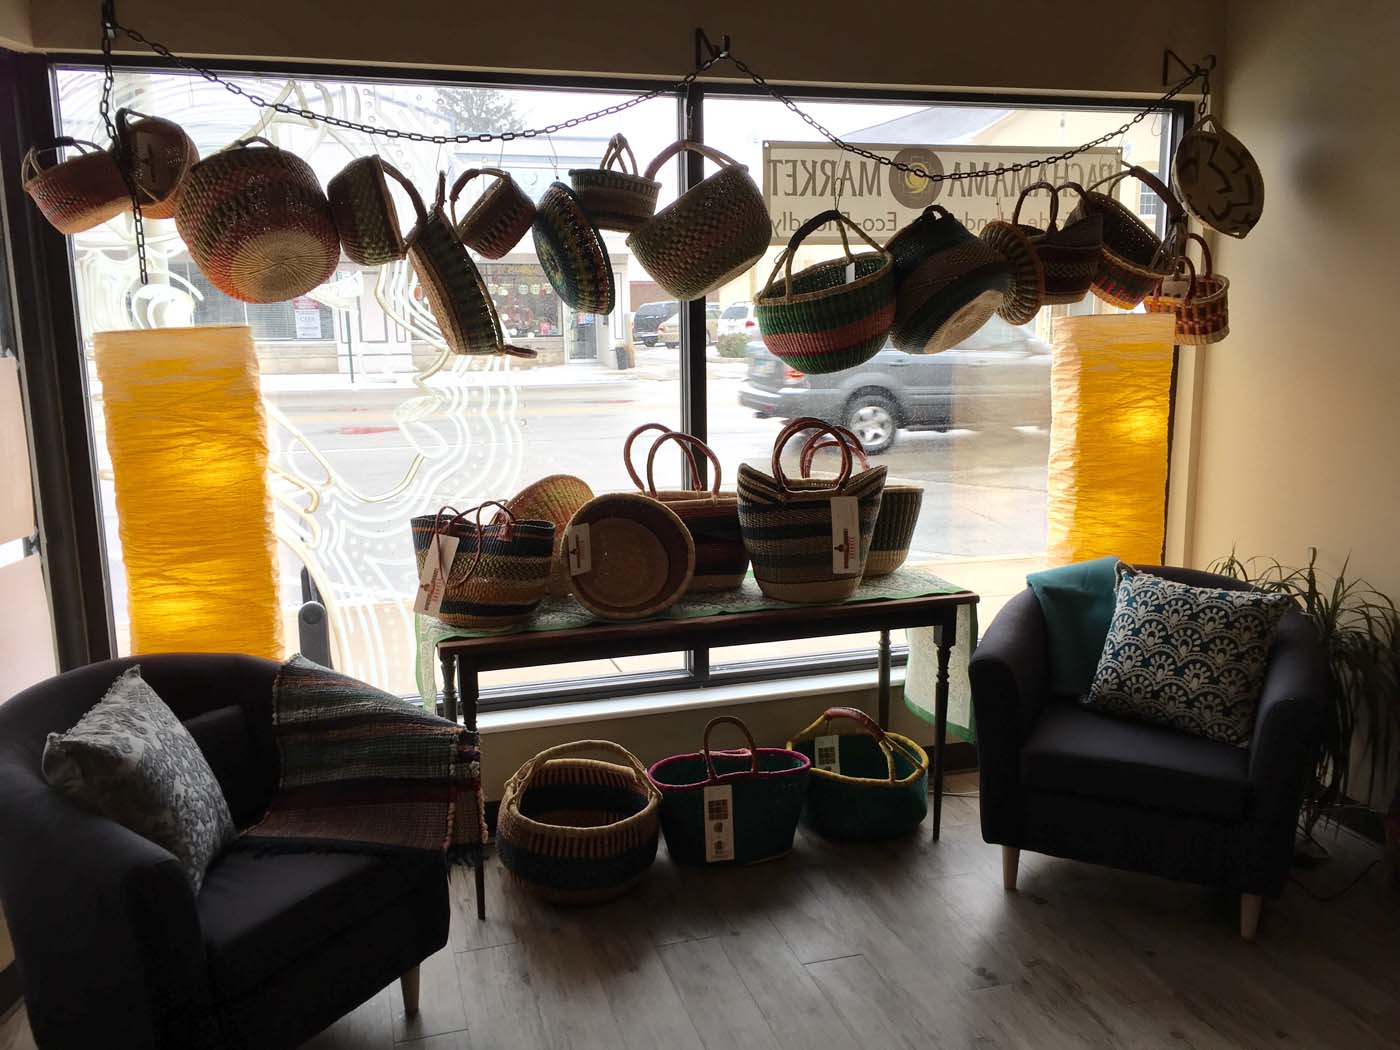 A horizontal window display that showcases the baskets